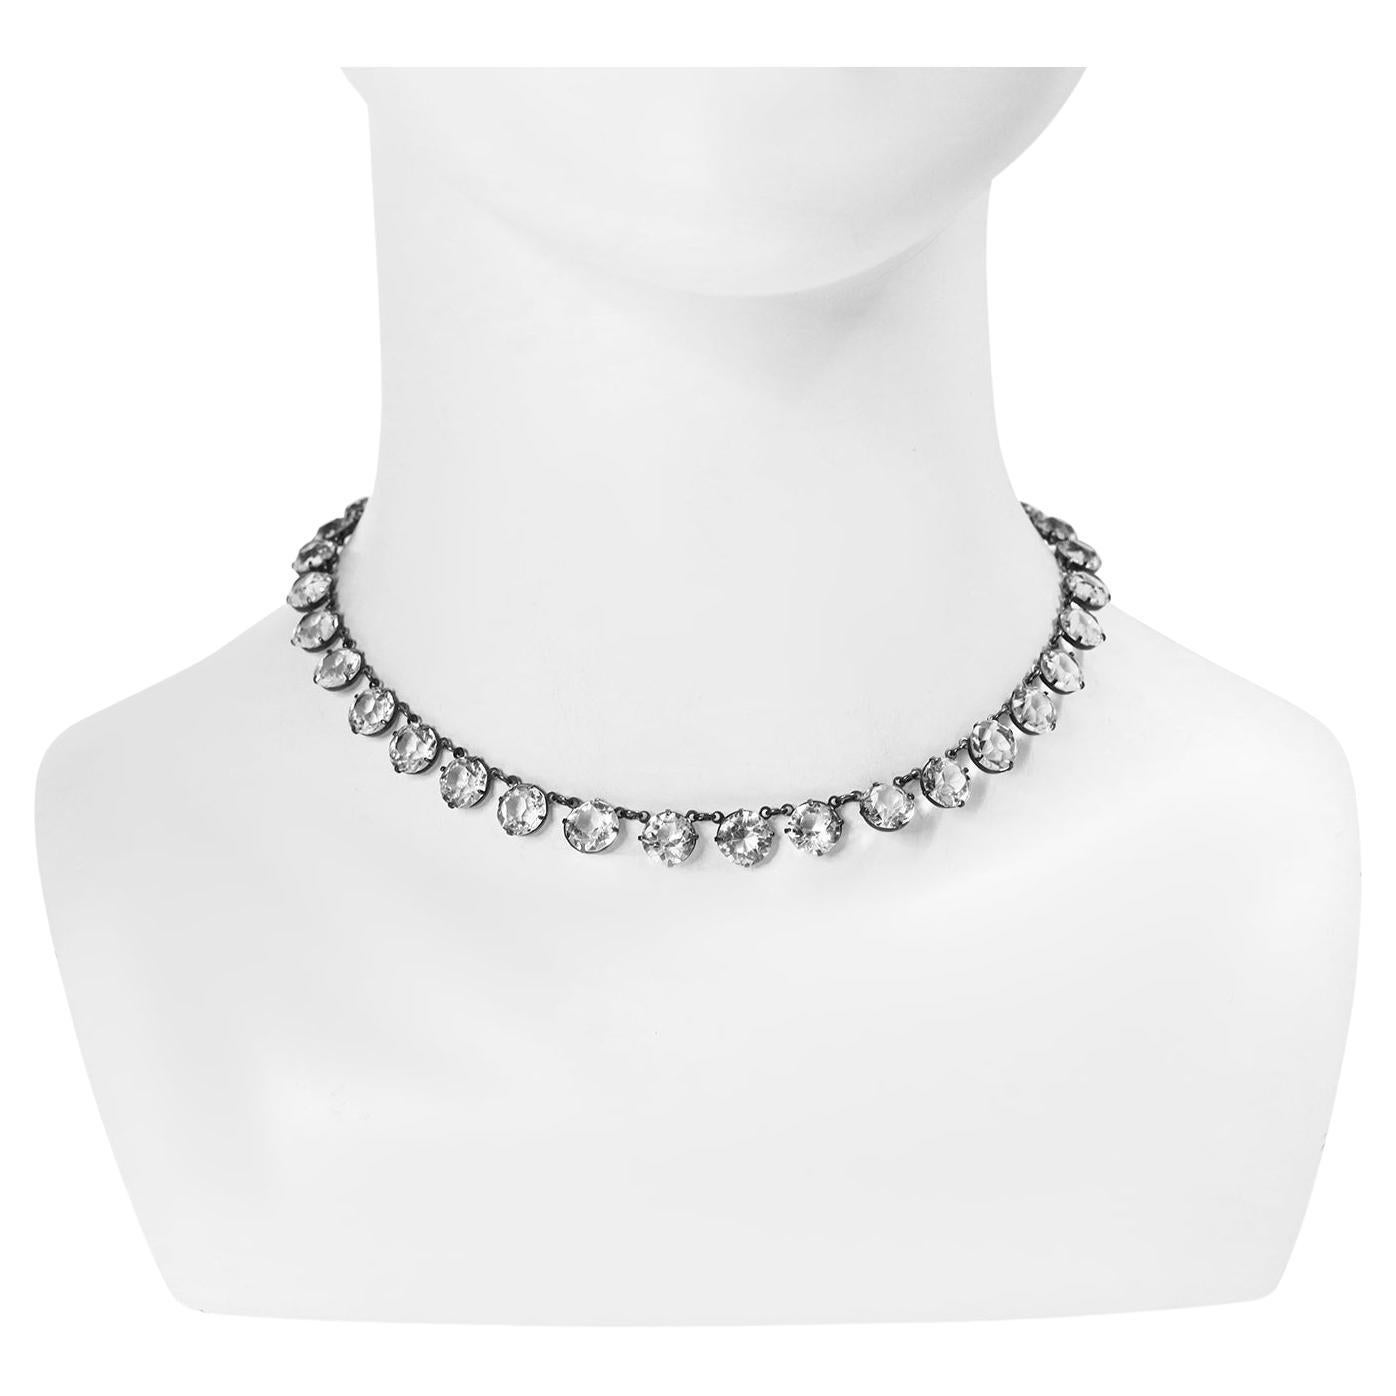 Vintage Sterling Open Back Crystal Choker Necklace Circa 1920's.  Same Sizing all around the neck.  Nothing looks like a true open back crystal necklace. The shine and beauty on the skin rivals a true stone.  When I was sold at Barneys New York